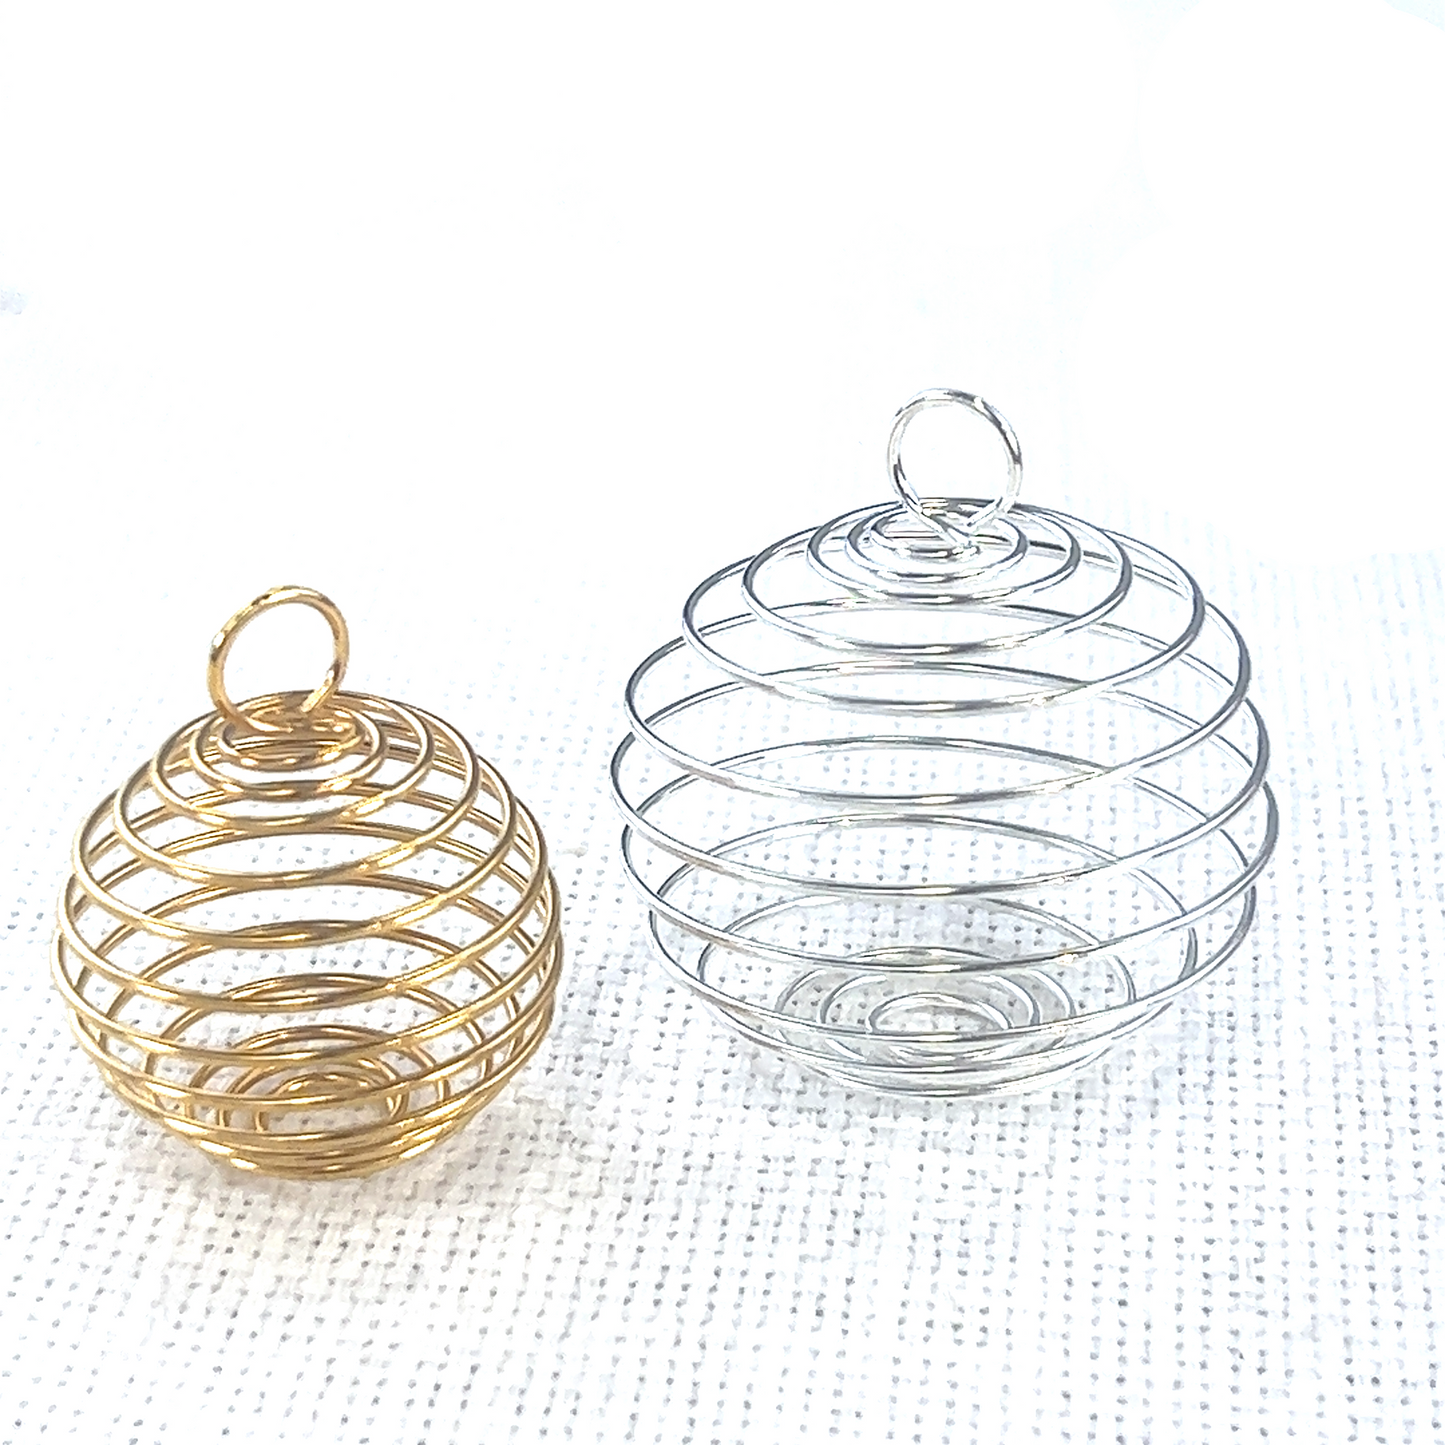 Two Super Silver Spiral Cage Pendant For Holding Gemstones on a white surface, perfect for charm enthusiasts.